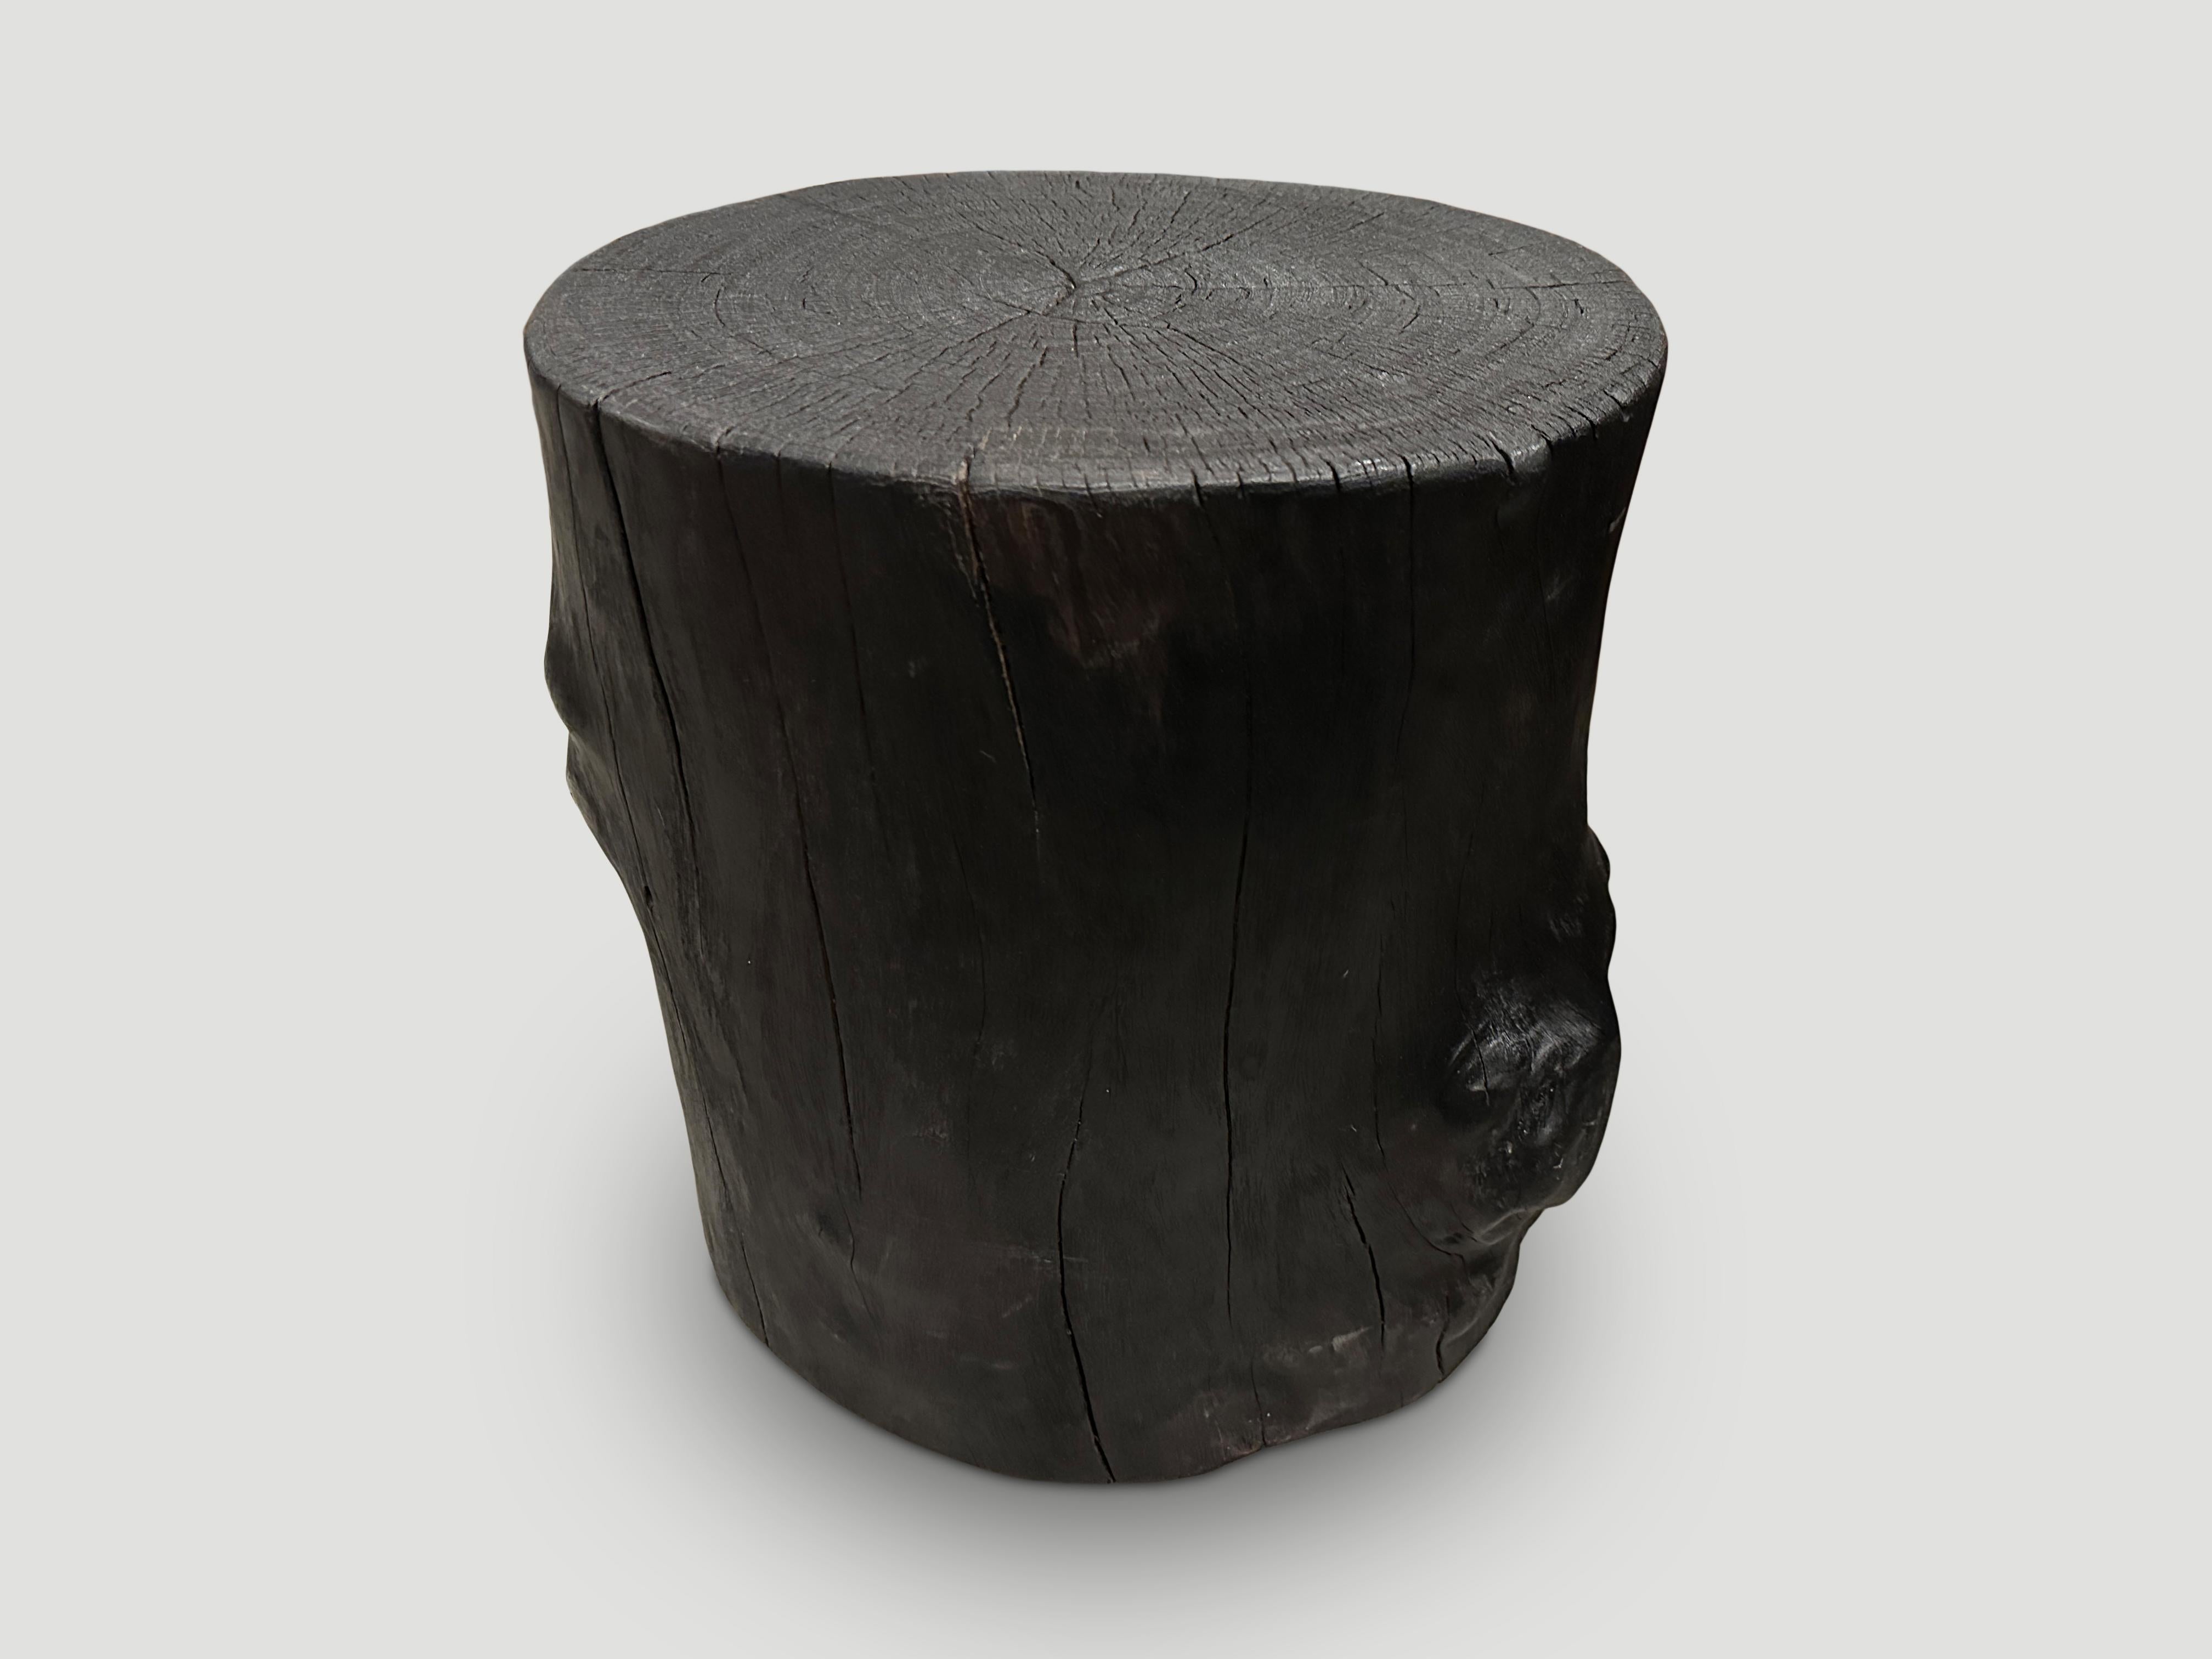 Reclaimed lychee wood side table. Burnt, sanded and sealed whilst respecting the natural organic shape. Sealed with a natural oil revealing the beautiful wood grain. 

The Triple Burnt Collection represents a unique line of modern furniture made